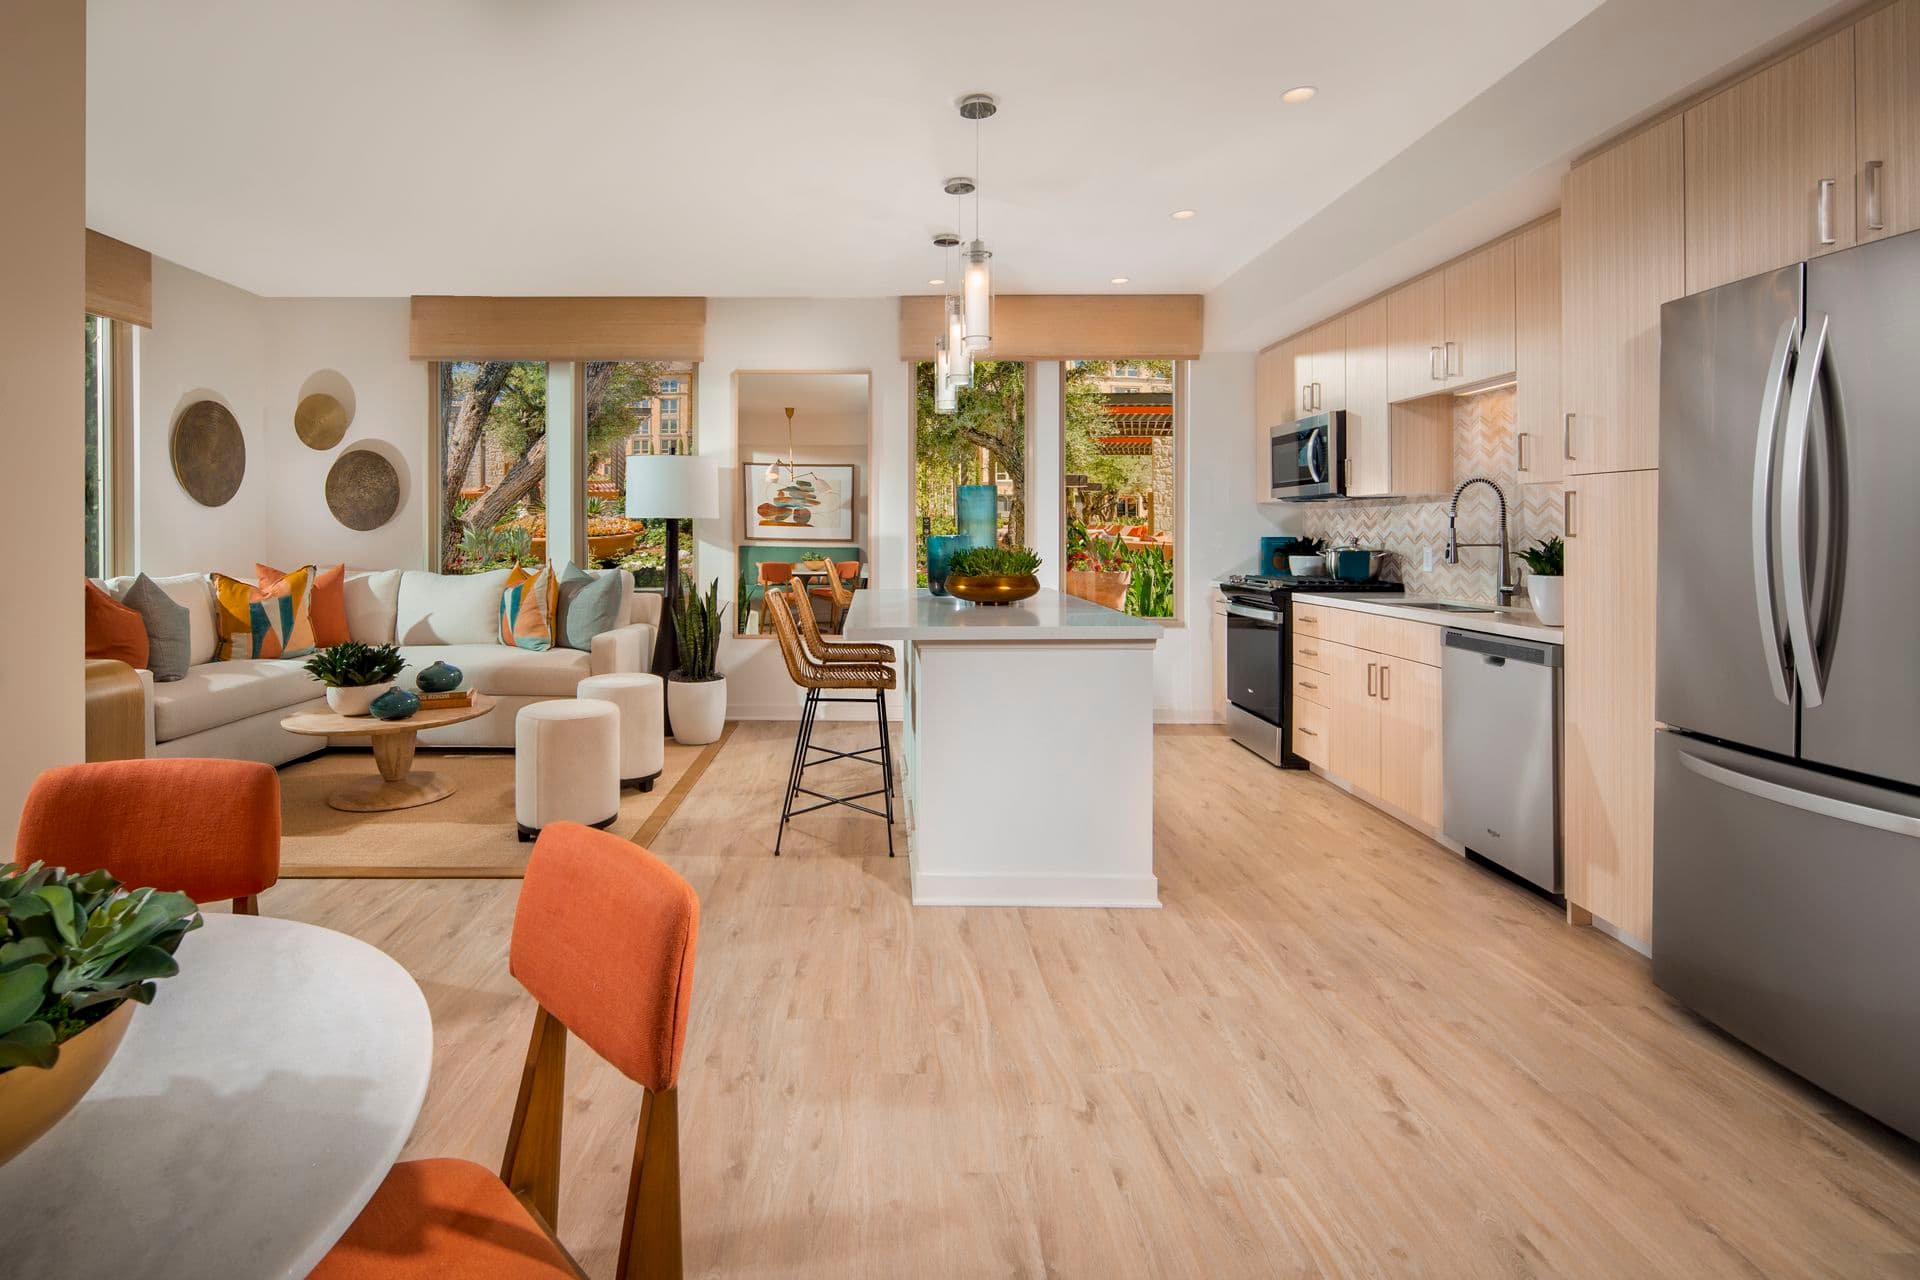 Image of living and kitchen area at Redwood Place